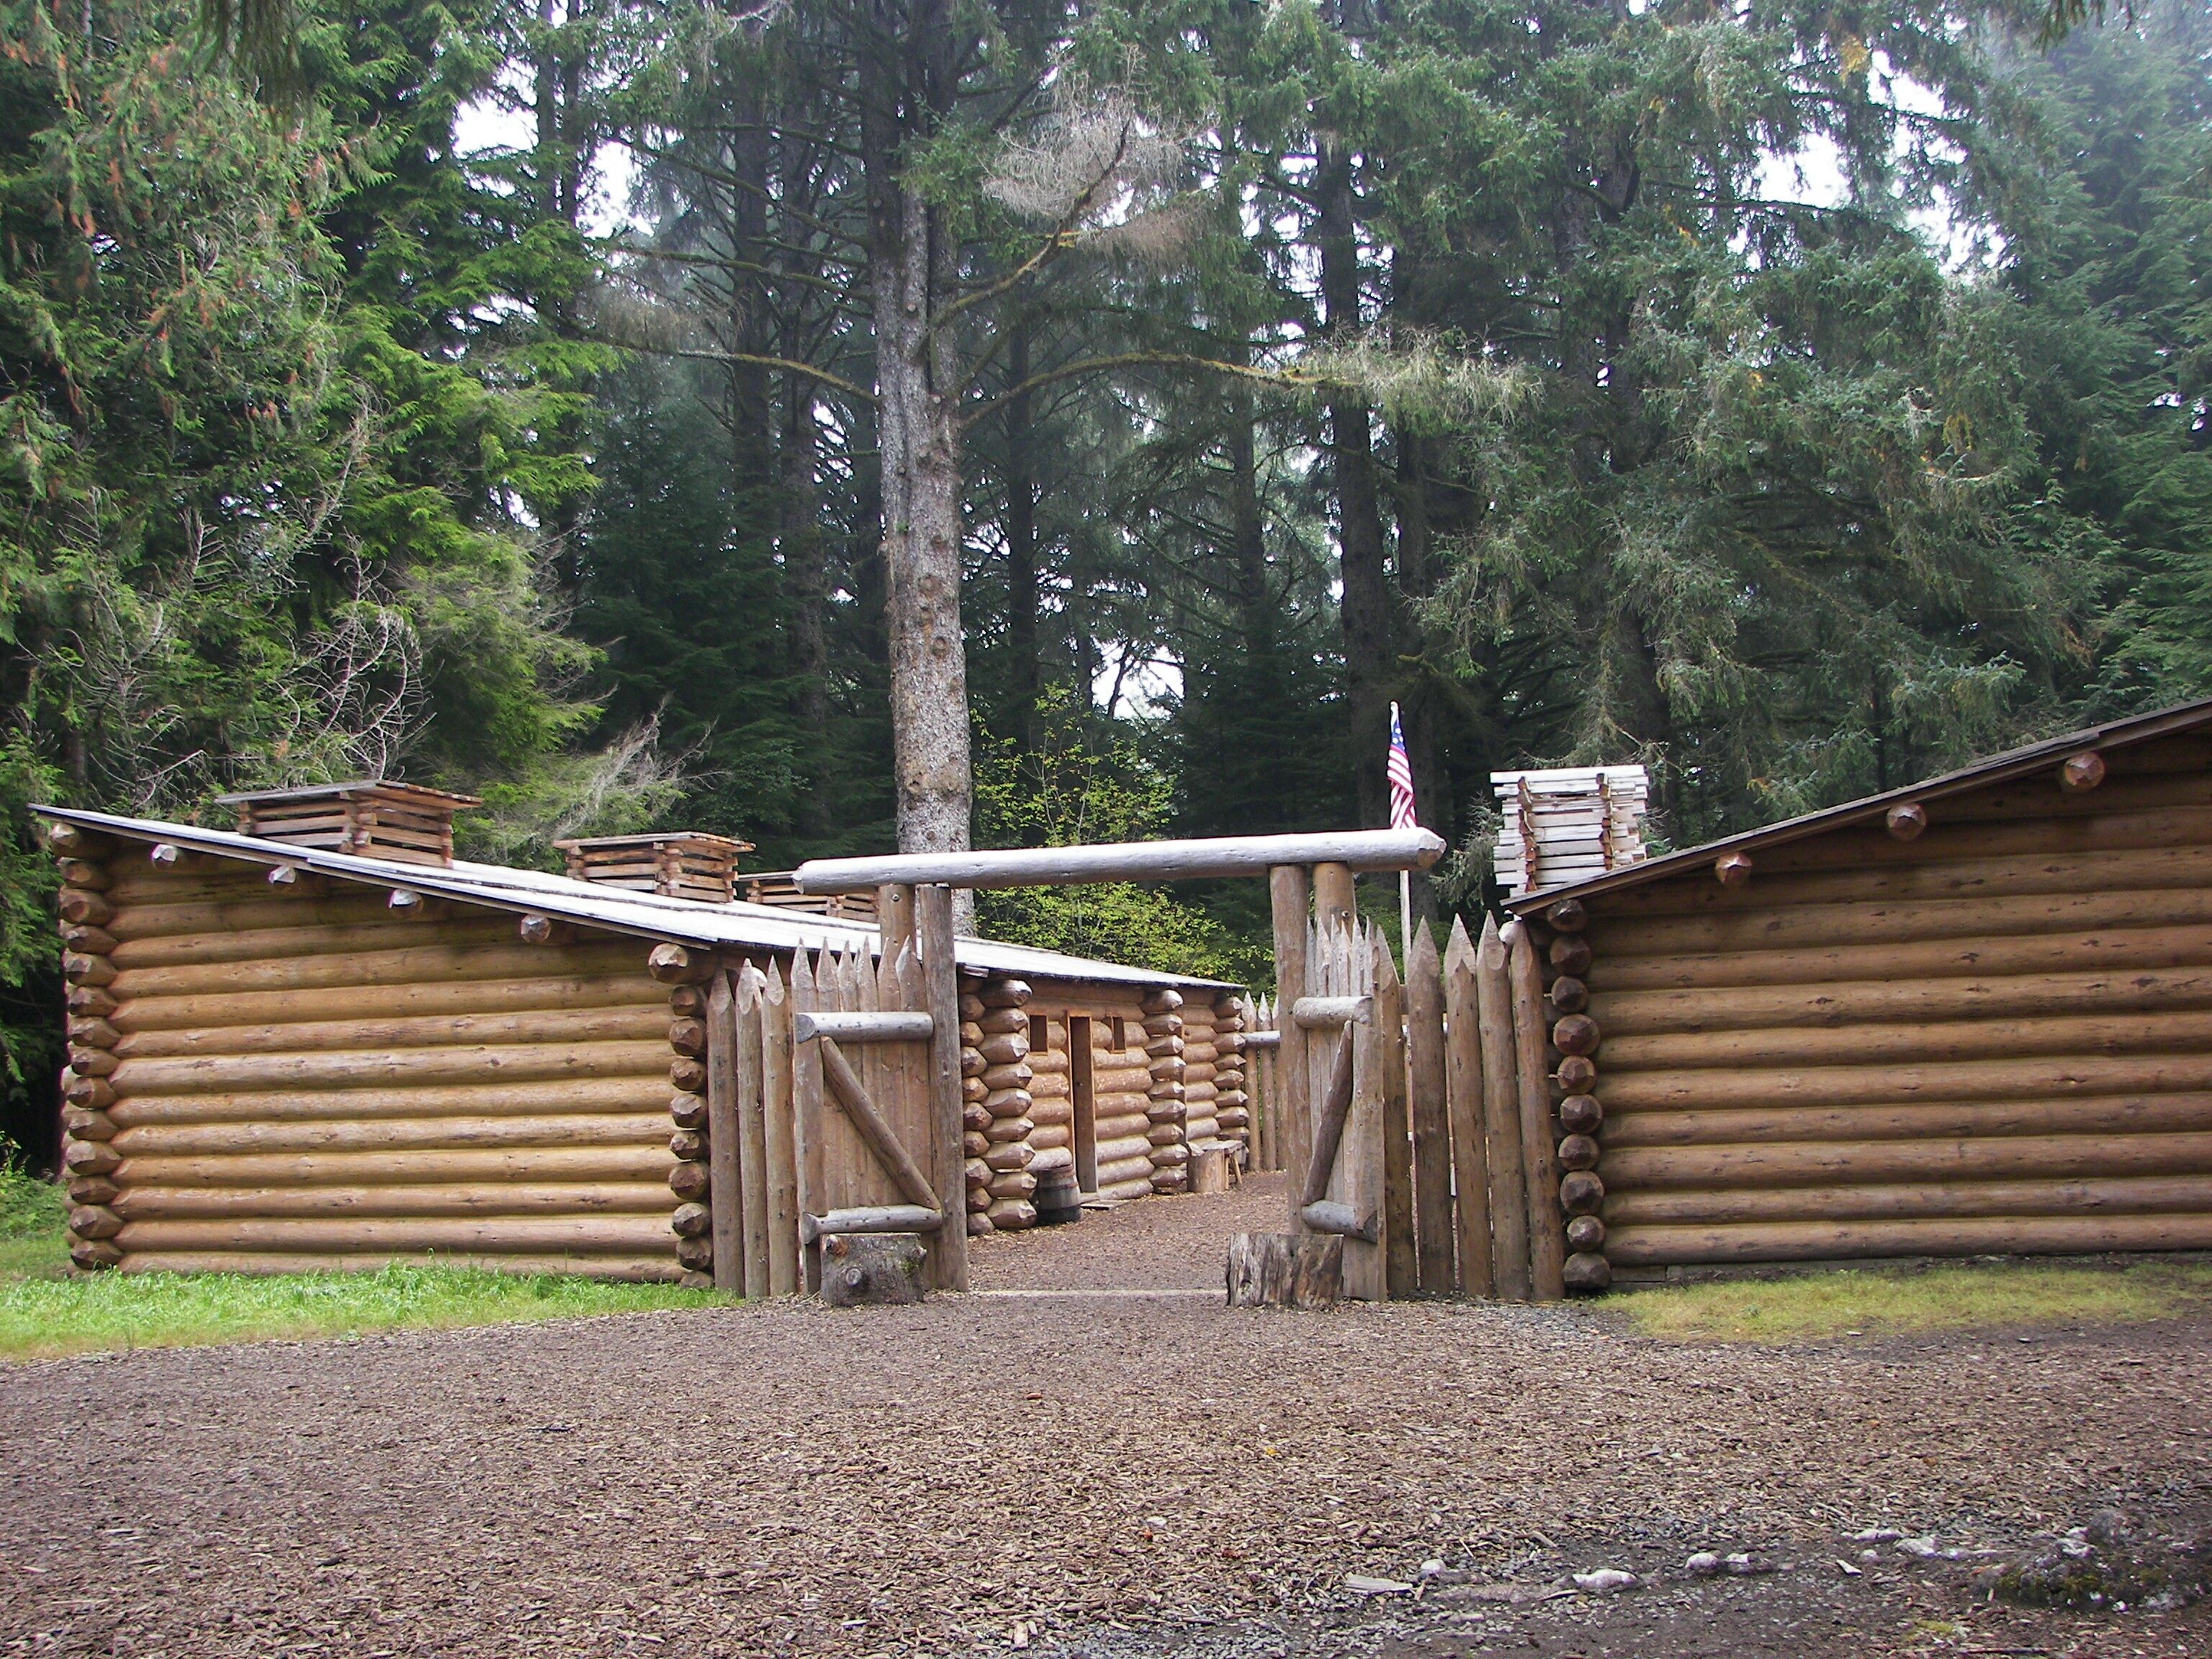 Fort Clatsop-Winter camp of Lewis and Clark.